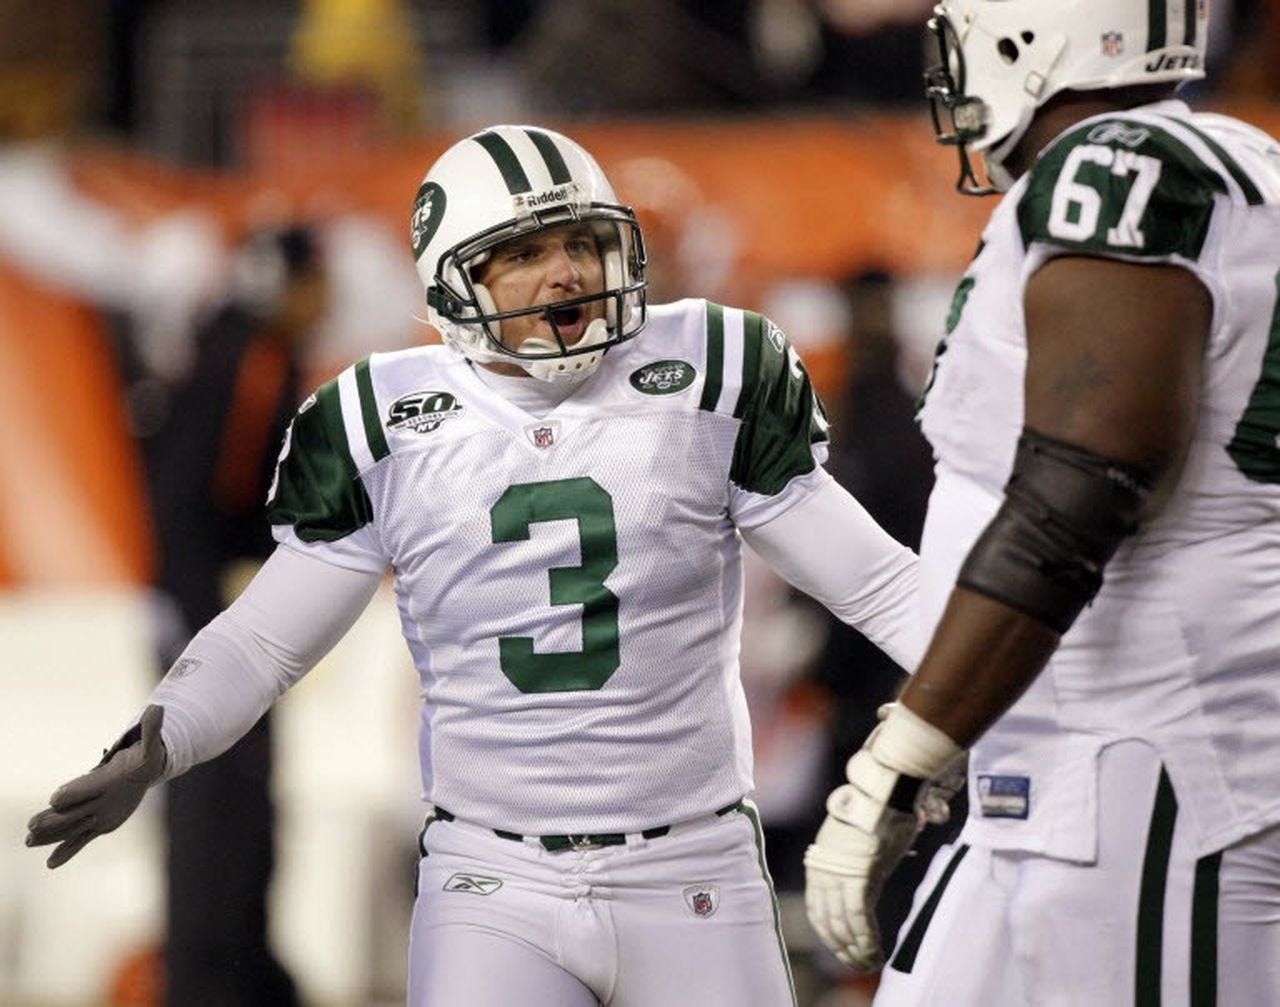 Report: Jay Feely leaves Jets, signs with Arizona Cardinals - silive.com